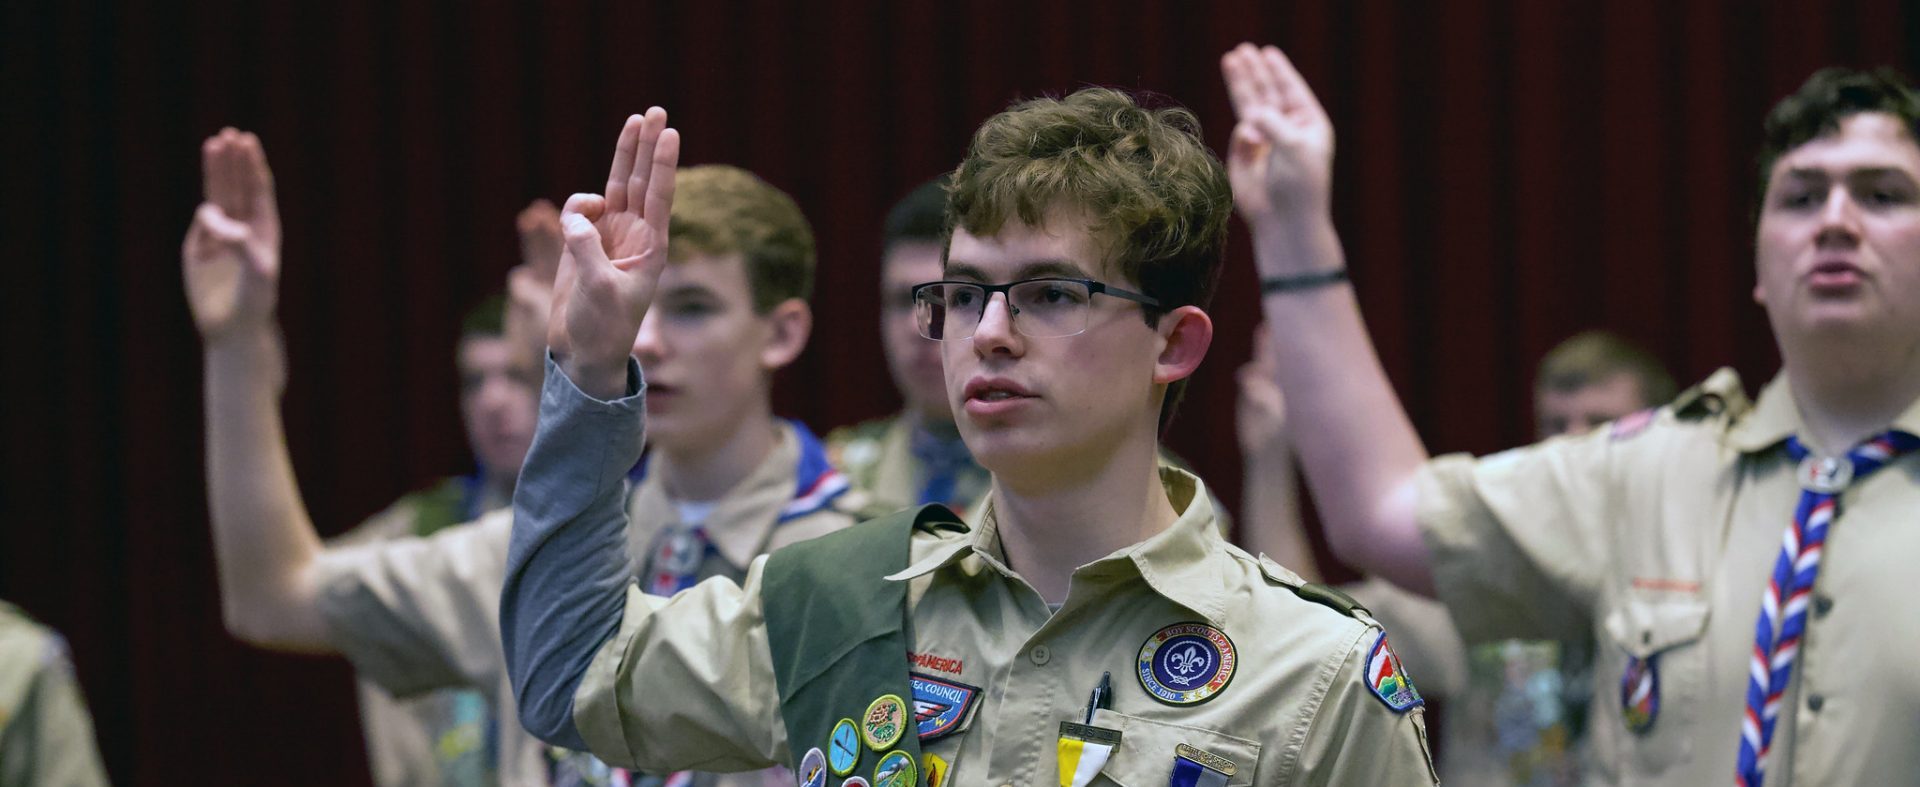 Scouts BSA  Greater St. Louis Area Scouting